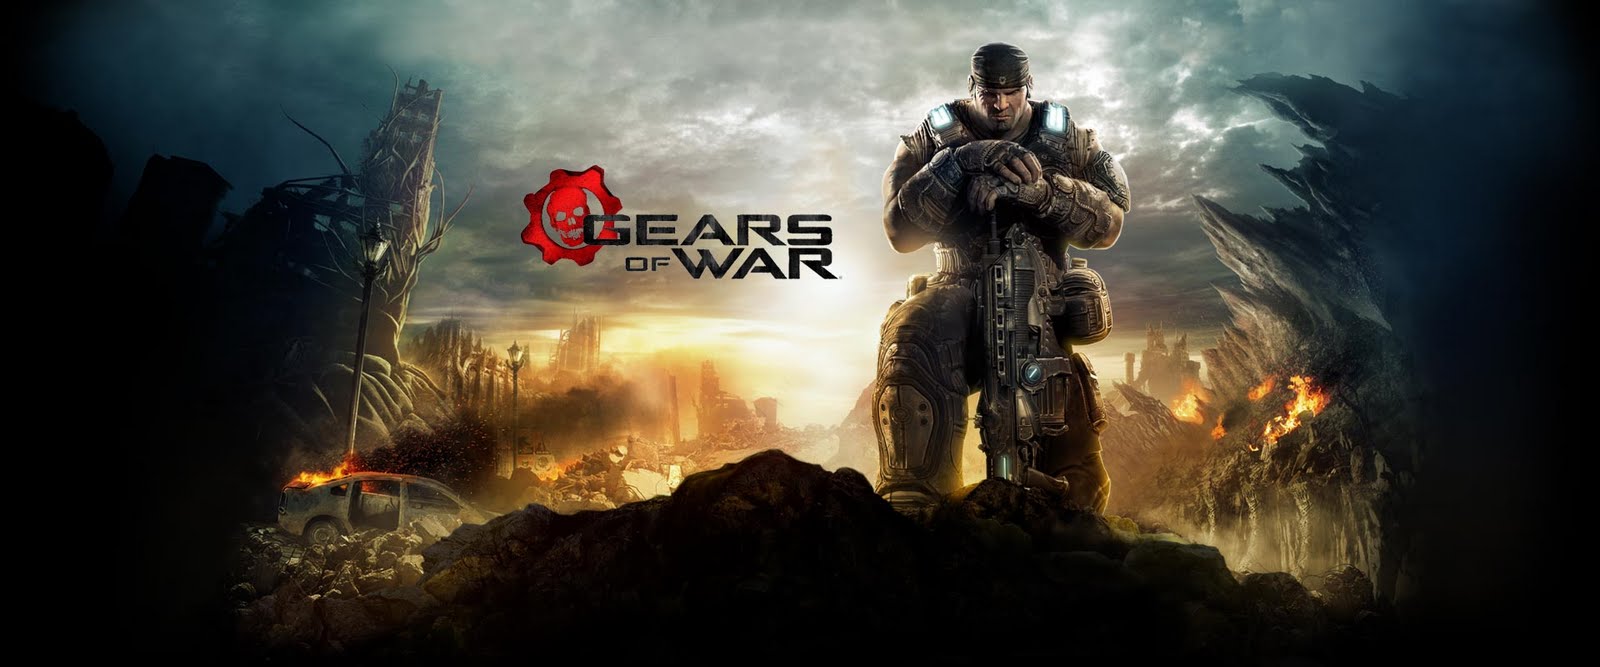  source Presented by LEAGUE OF FICTION Gears of War 3 Wallpaper